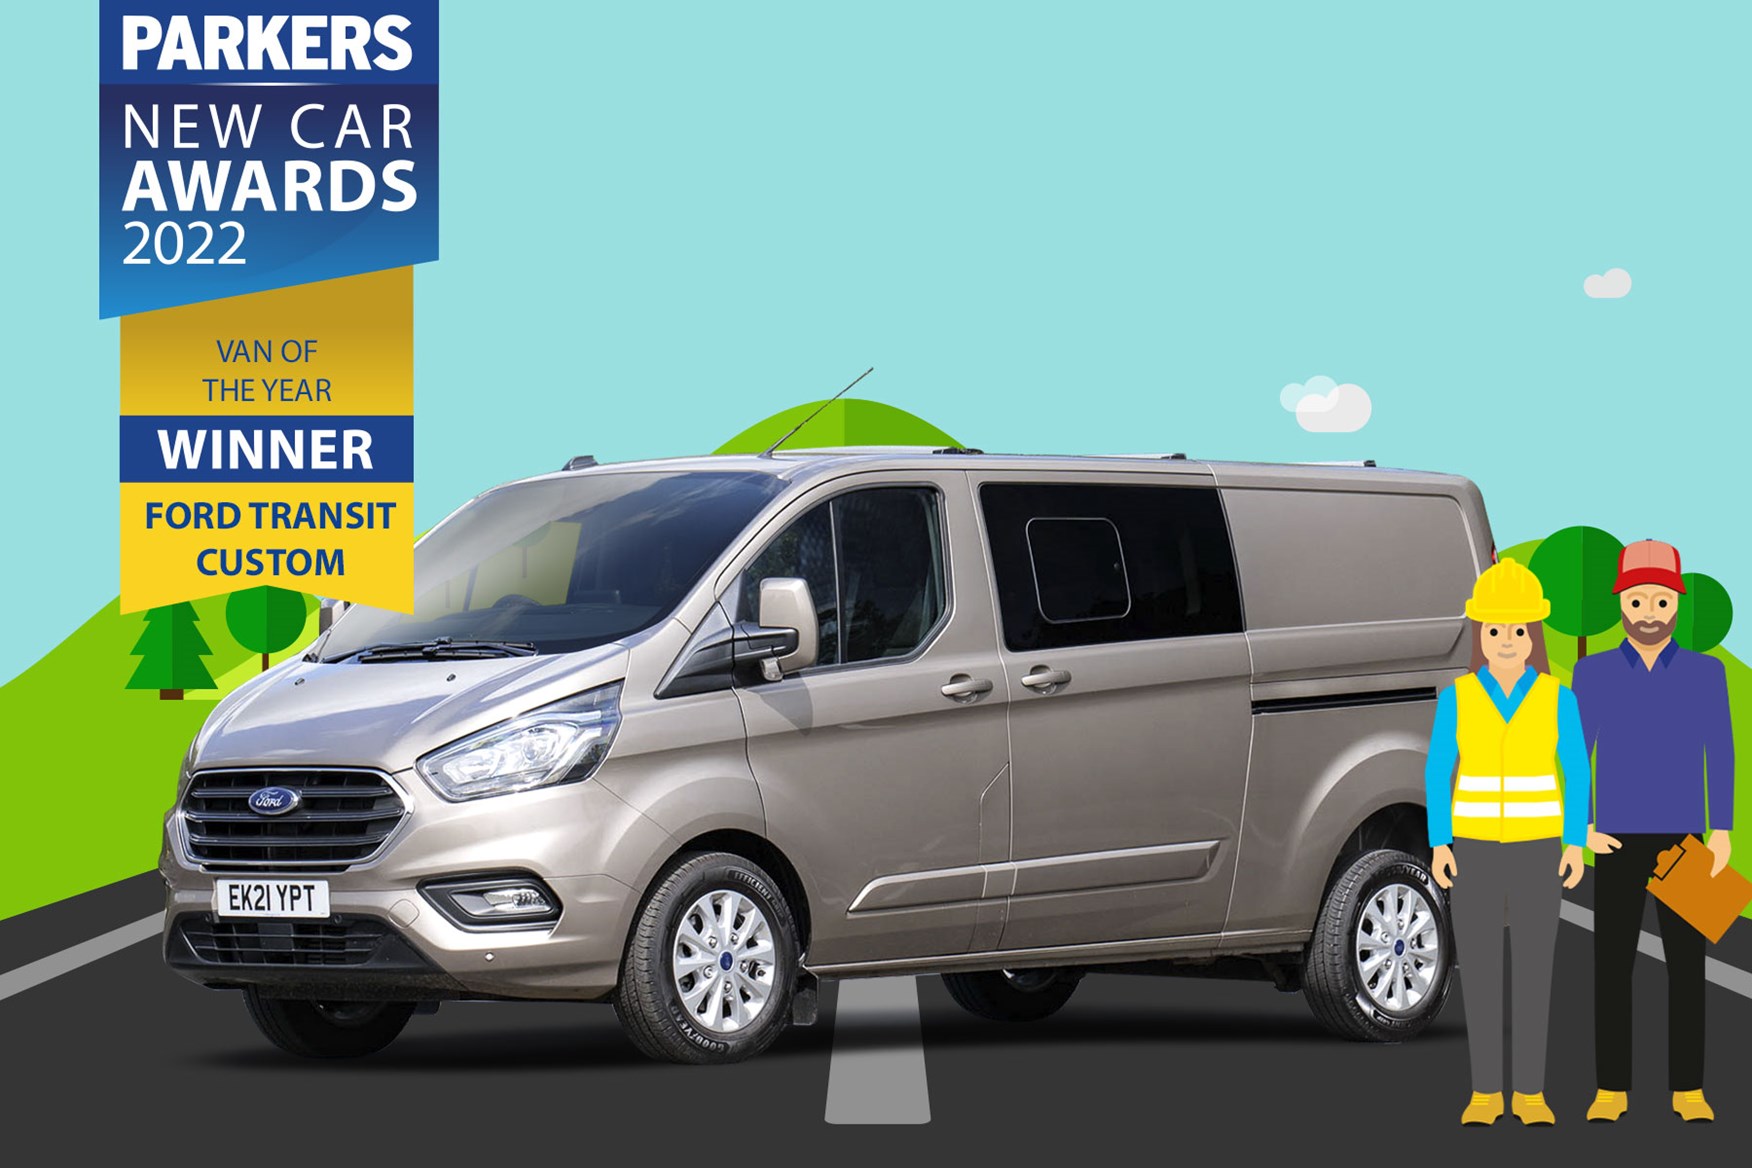 Van of the Year  Parkers Car Awards 2022